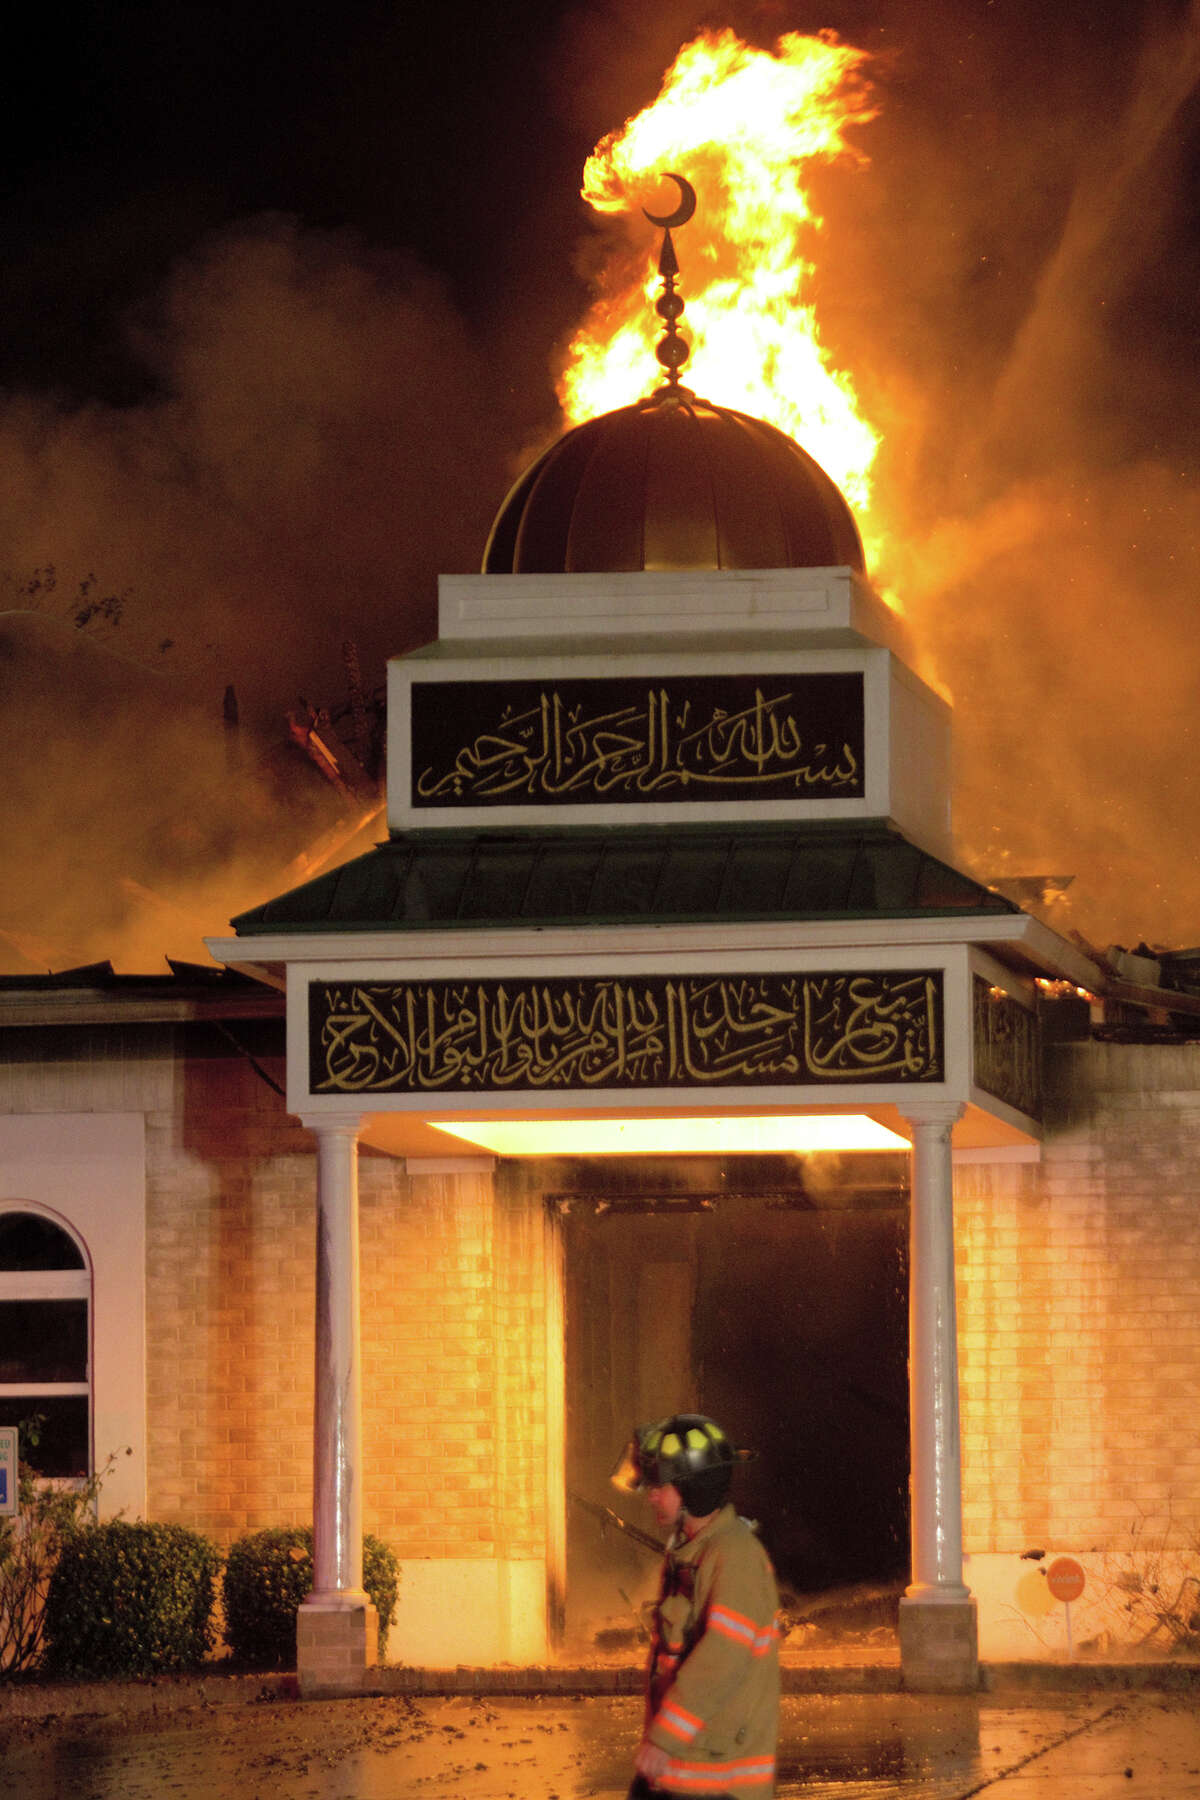 Fire destroyed the Islamic Center of Victoria on Jan. 28. ﻿Within a few days, the community raised more than $1 million to rebuild the mosque.